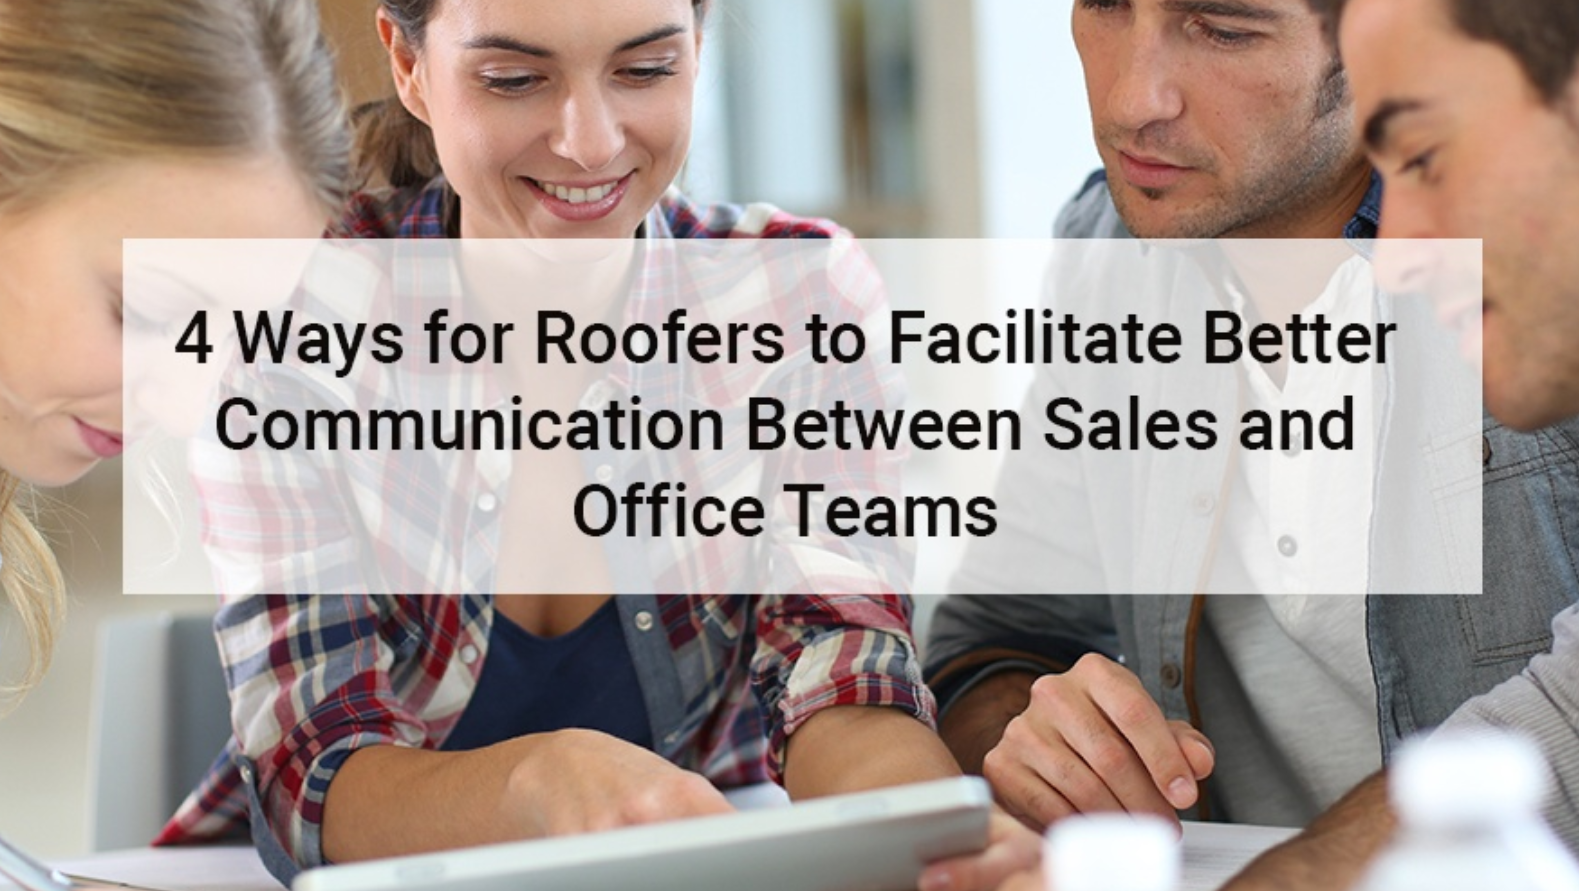 August - GuestBlog - AccuLynx - 4 ways for roofers to facilitate better communication between sales and office teams